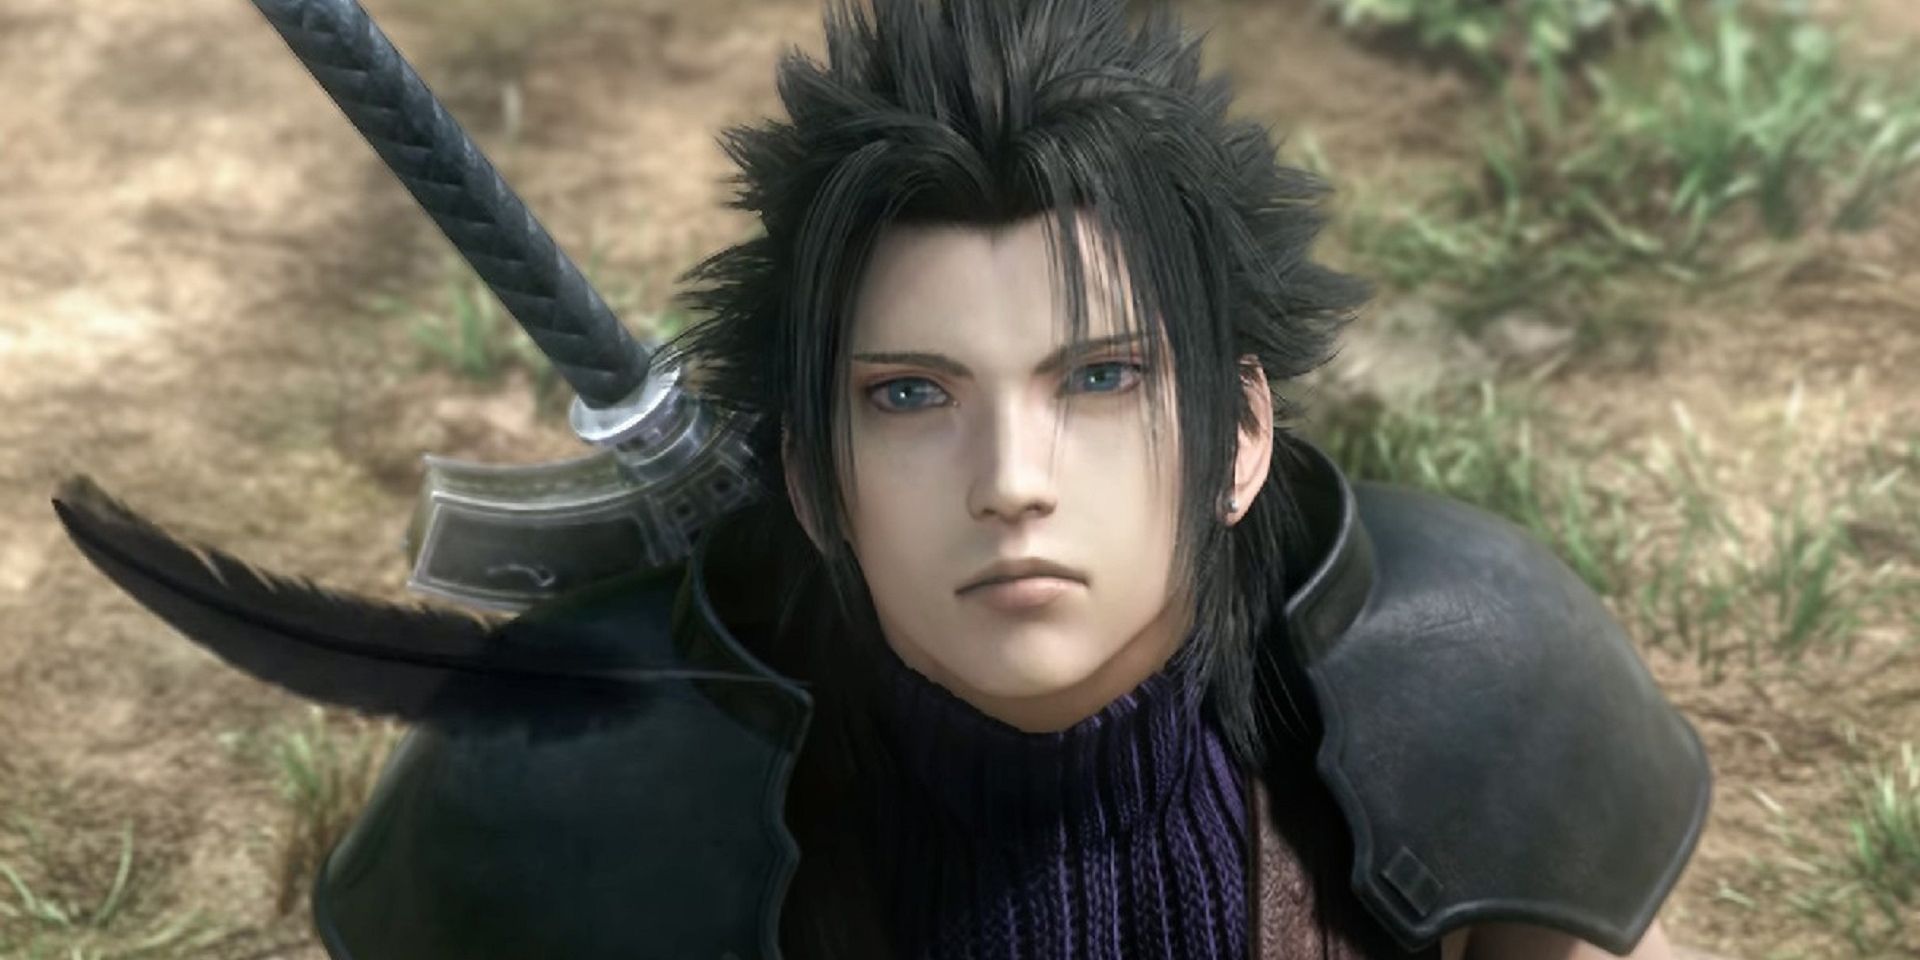 Zack Fair in Crisis Core Final Fantasy 7 Reunion, looking up at a black feather floating through the air.